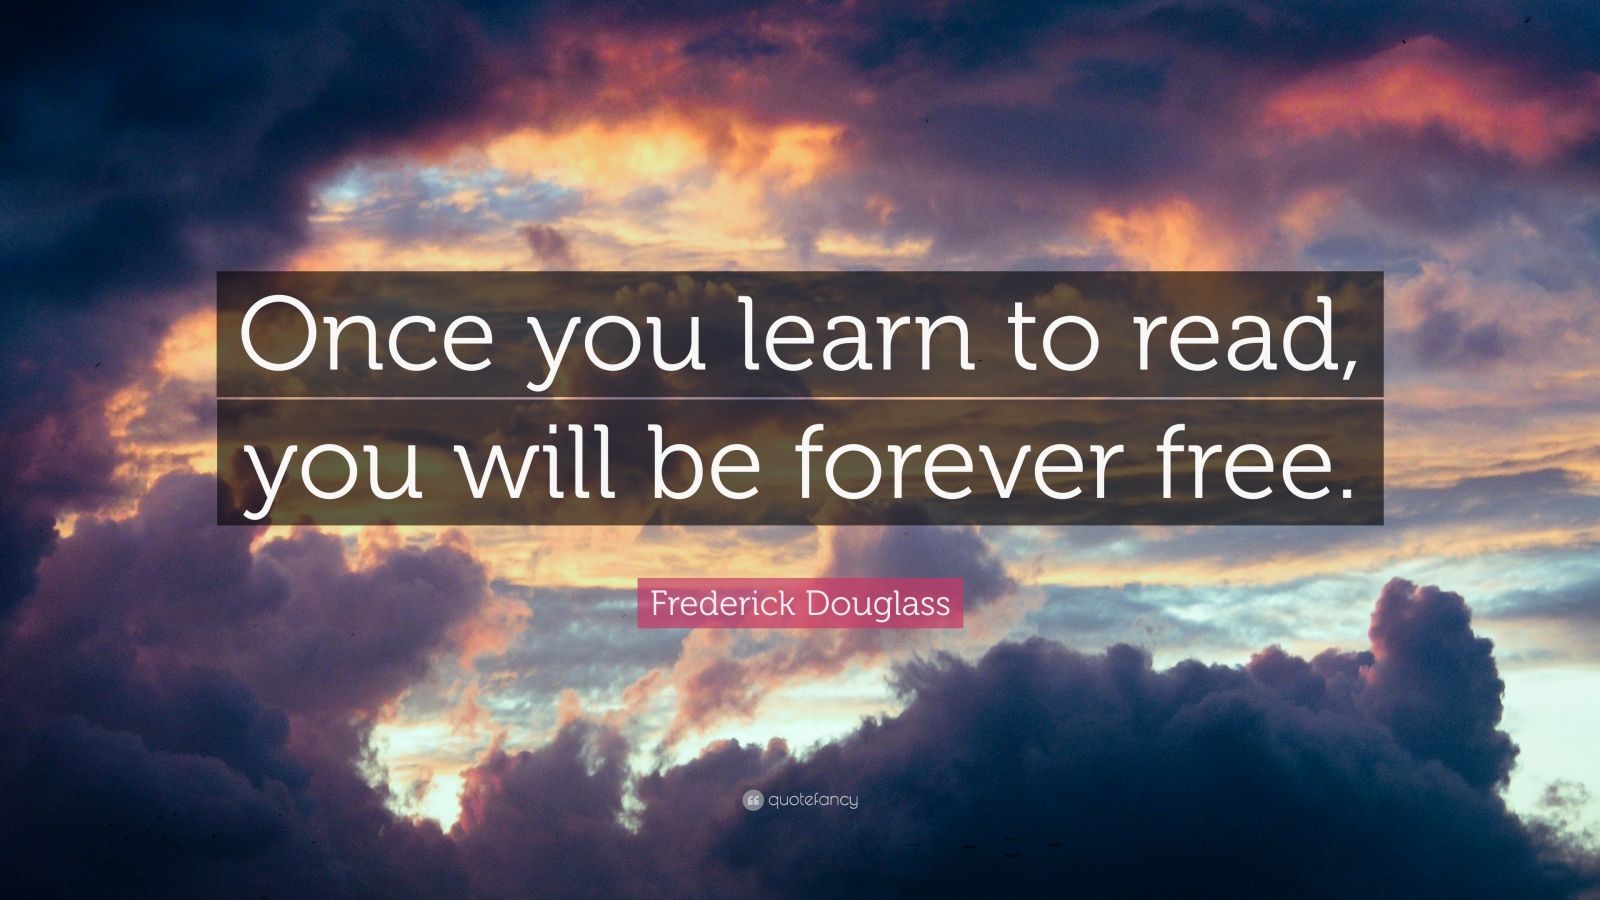 Frederick Douglass Quote: â€œOnce you learn to read, you will be forever